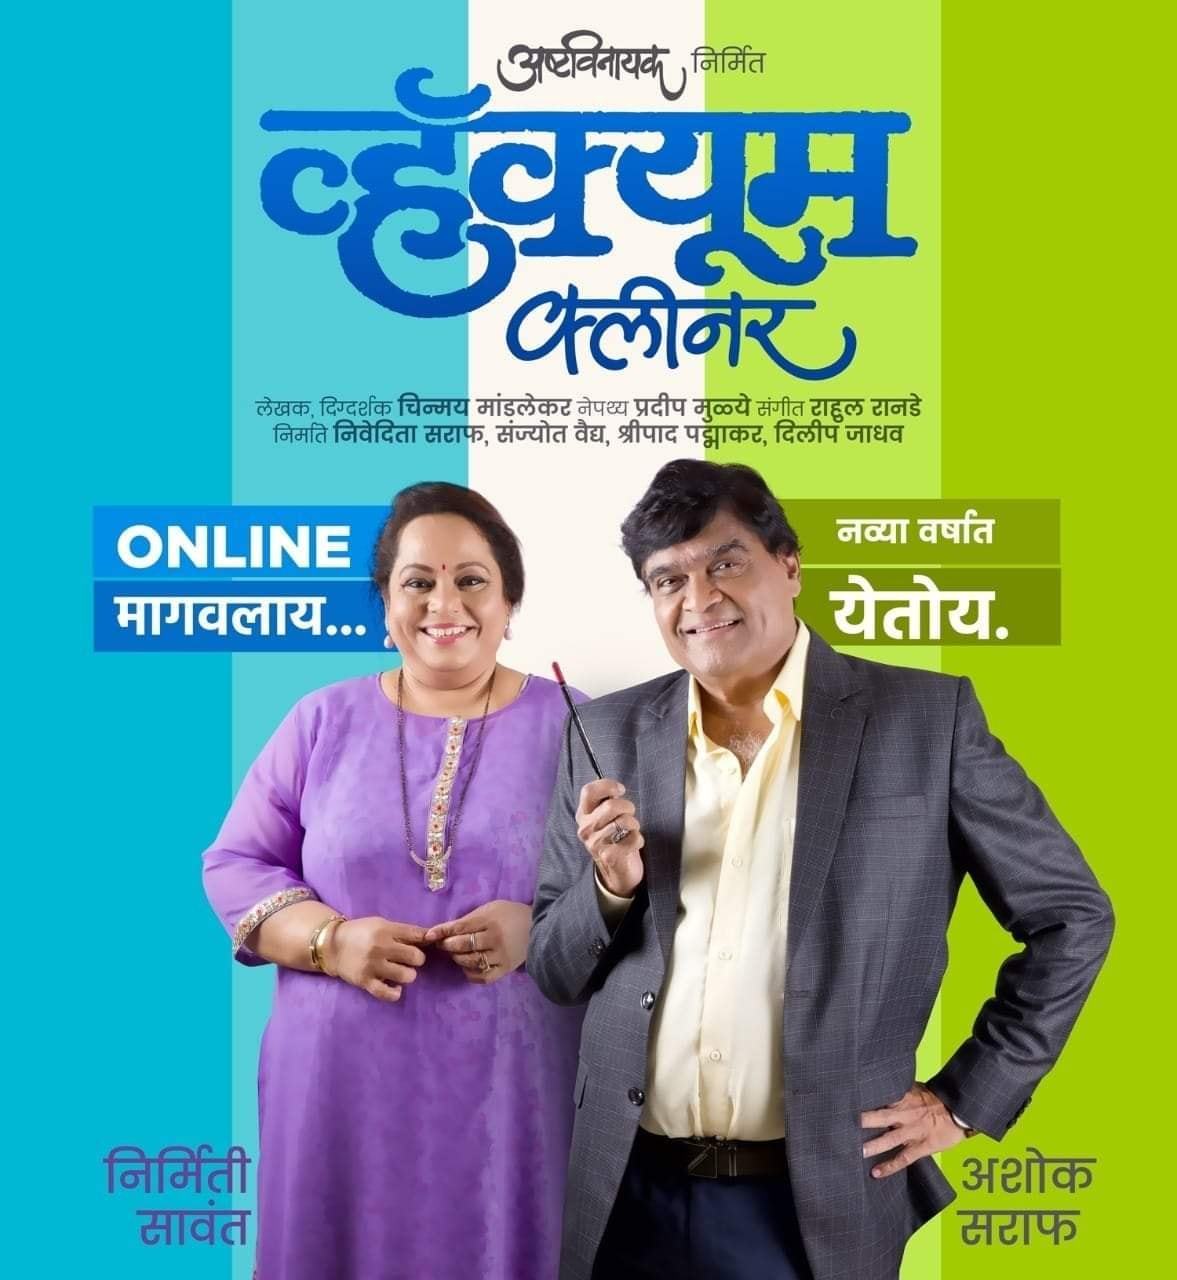 Review: FAMOUS ACTOR ASHOK SARAF OF HUM PAANCH FAME In Marathi Play Vacuum Cleaner 